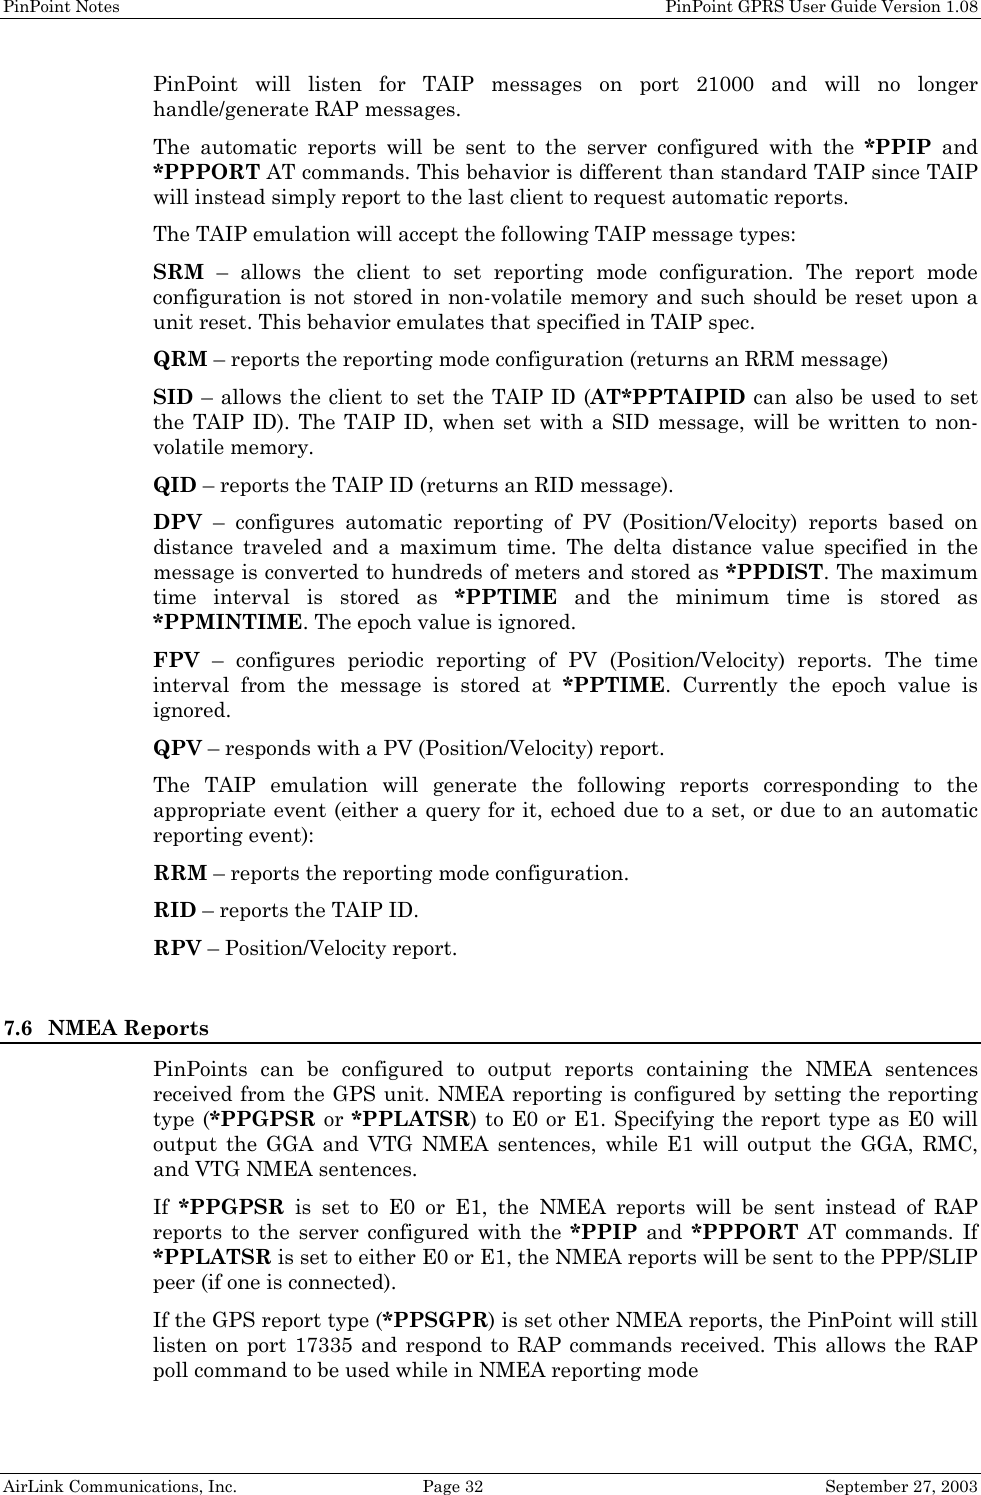 PinPoint Notes    PinPoint GPRS User Guide Version 1.08 AirLink Communications, Inc.  Page 32  September 27, 2003 PinPoint will listen for TAIP messages on port 21000 and will no longer handle/generate RAP messages.  The automatic reports will be sent to the server configured with the *PPIP and *PPPORT AT commands. This behavior is different than standard TAIP since TAIP will instead simply report to the last client to request automatic reports. The TAIP emulation will accept the following TAIP message types: SRM – allows the client to set reporting mode configuration. The report mode configuration is not stored in non-volatile memory and such should be reset upon a unit reset. This behavior emulates that specified in TAIP spec. QRM – reports the reporting mode configuration (returns an RRM message) SID – allows the client to set the TAIP ID (AT*PPTAIPID can also be used to set the TAIP ID). The TAIP ID, when set with a SID message, will be written to non-volatile memory. QID – reports the TAIP ID (returns an RID message). DPV – configures automatic reporting of PV (Position/Velocity) reports based on distance traveled and a maximum time. The delta distance value specified in the message is converted to hundreds of meters and stored as *PPDIST. The maximum time interval is stored as *PPTIME and the minimum time is stored as *PPMINTIME. The epoch value is ignored. FPV – configures periodic reporting of PV (Position/Velocity) reports. The time interval from the message is stored at *PPTIME. Currently the epoch value is ignored. QPV – responds with a PV (Position/Velocity) report. The TAIP emulation will generate the following reports corresponding to the appropriate event (either a query for it, echoed due to a set, or due to an automatic reporting event): RRM – reports the reporting mode configuration. RID – reports the TAIP ID. RPV – Position/Velocity report.  7.6 NMEA Reports PinPoints can be configured to output reports containing the NMEA sentences received from the GPS unit. NMEA reporting is configured by setting the reporting type (*PPGPSR or *PPLATSR) to E0 or E1. Specifying the report type as E0 will output the GGA and VTG NMEA sentences, while E1 will output the GGA, RMC, and VTG NMEA sentences. If  *PPGPSR is set to E0 or E1, the NMEA reports will be sent instead of RAP reports to the server configured with the *PPIP and *PPPORT AT commands. If *PPLATSR is set to either E0 or E1, the NMEA reports will be sent to the PPP/SLIP peer (if one is connected). If the GPS report type (*PPSGPR) is set other NMEA reports, the PinPoint will still listen on port 17335 and respond to RAP commands received. This allows the RAP poll command to be used while in NMEA reporting mode 